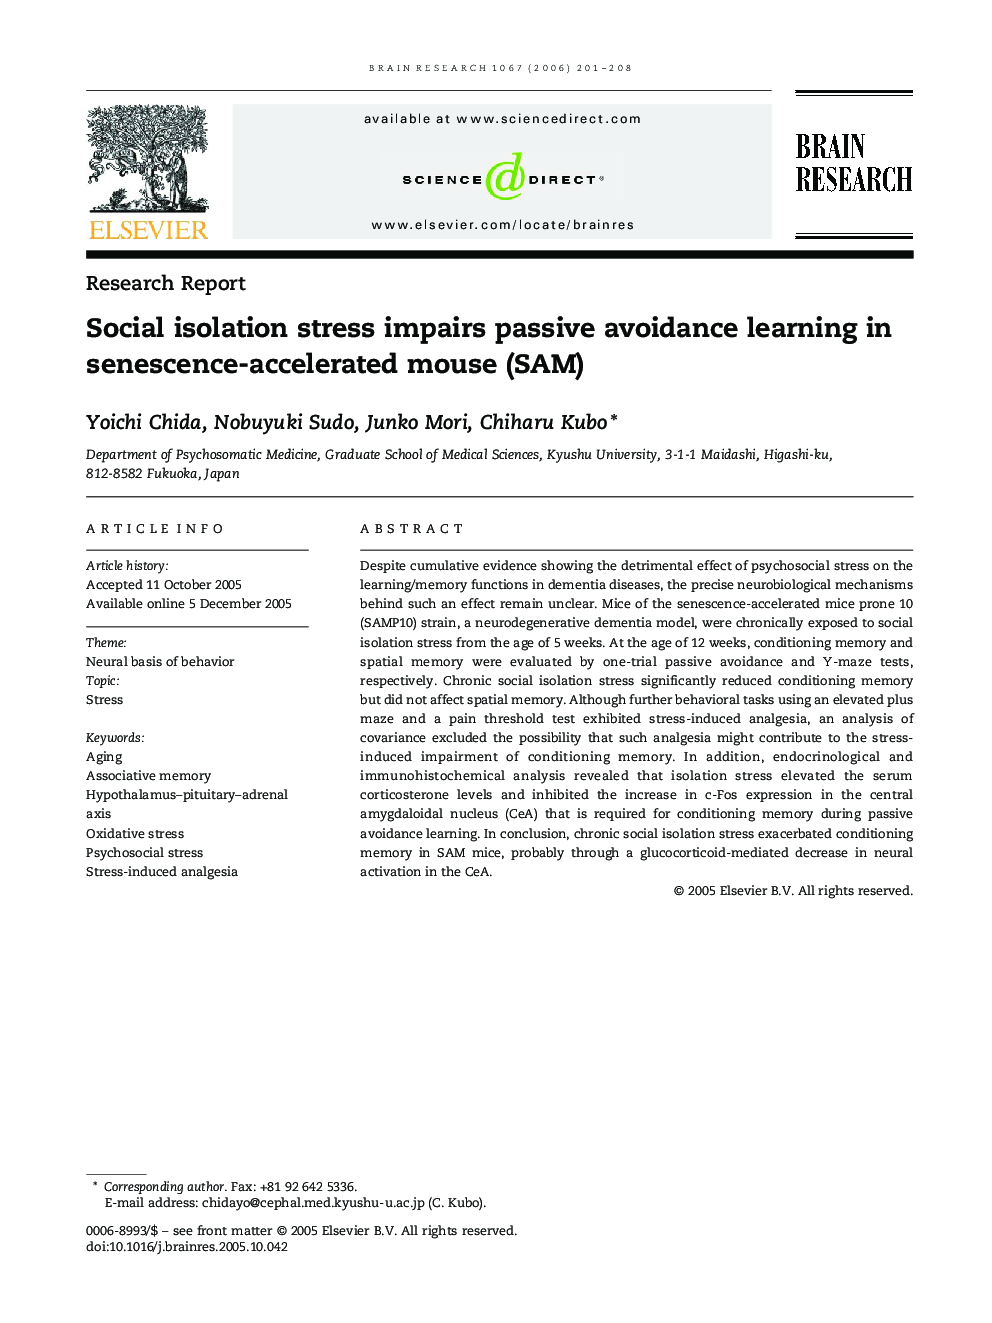 Social isolation stress impairs passive avoidance learning in senescence-accelerated mouse (SAM)